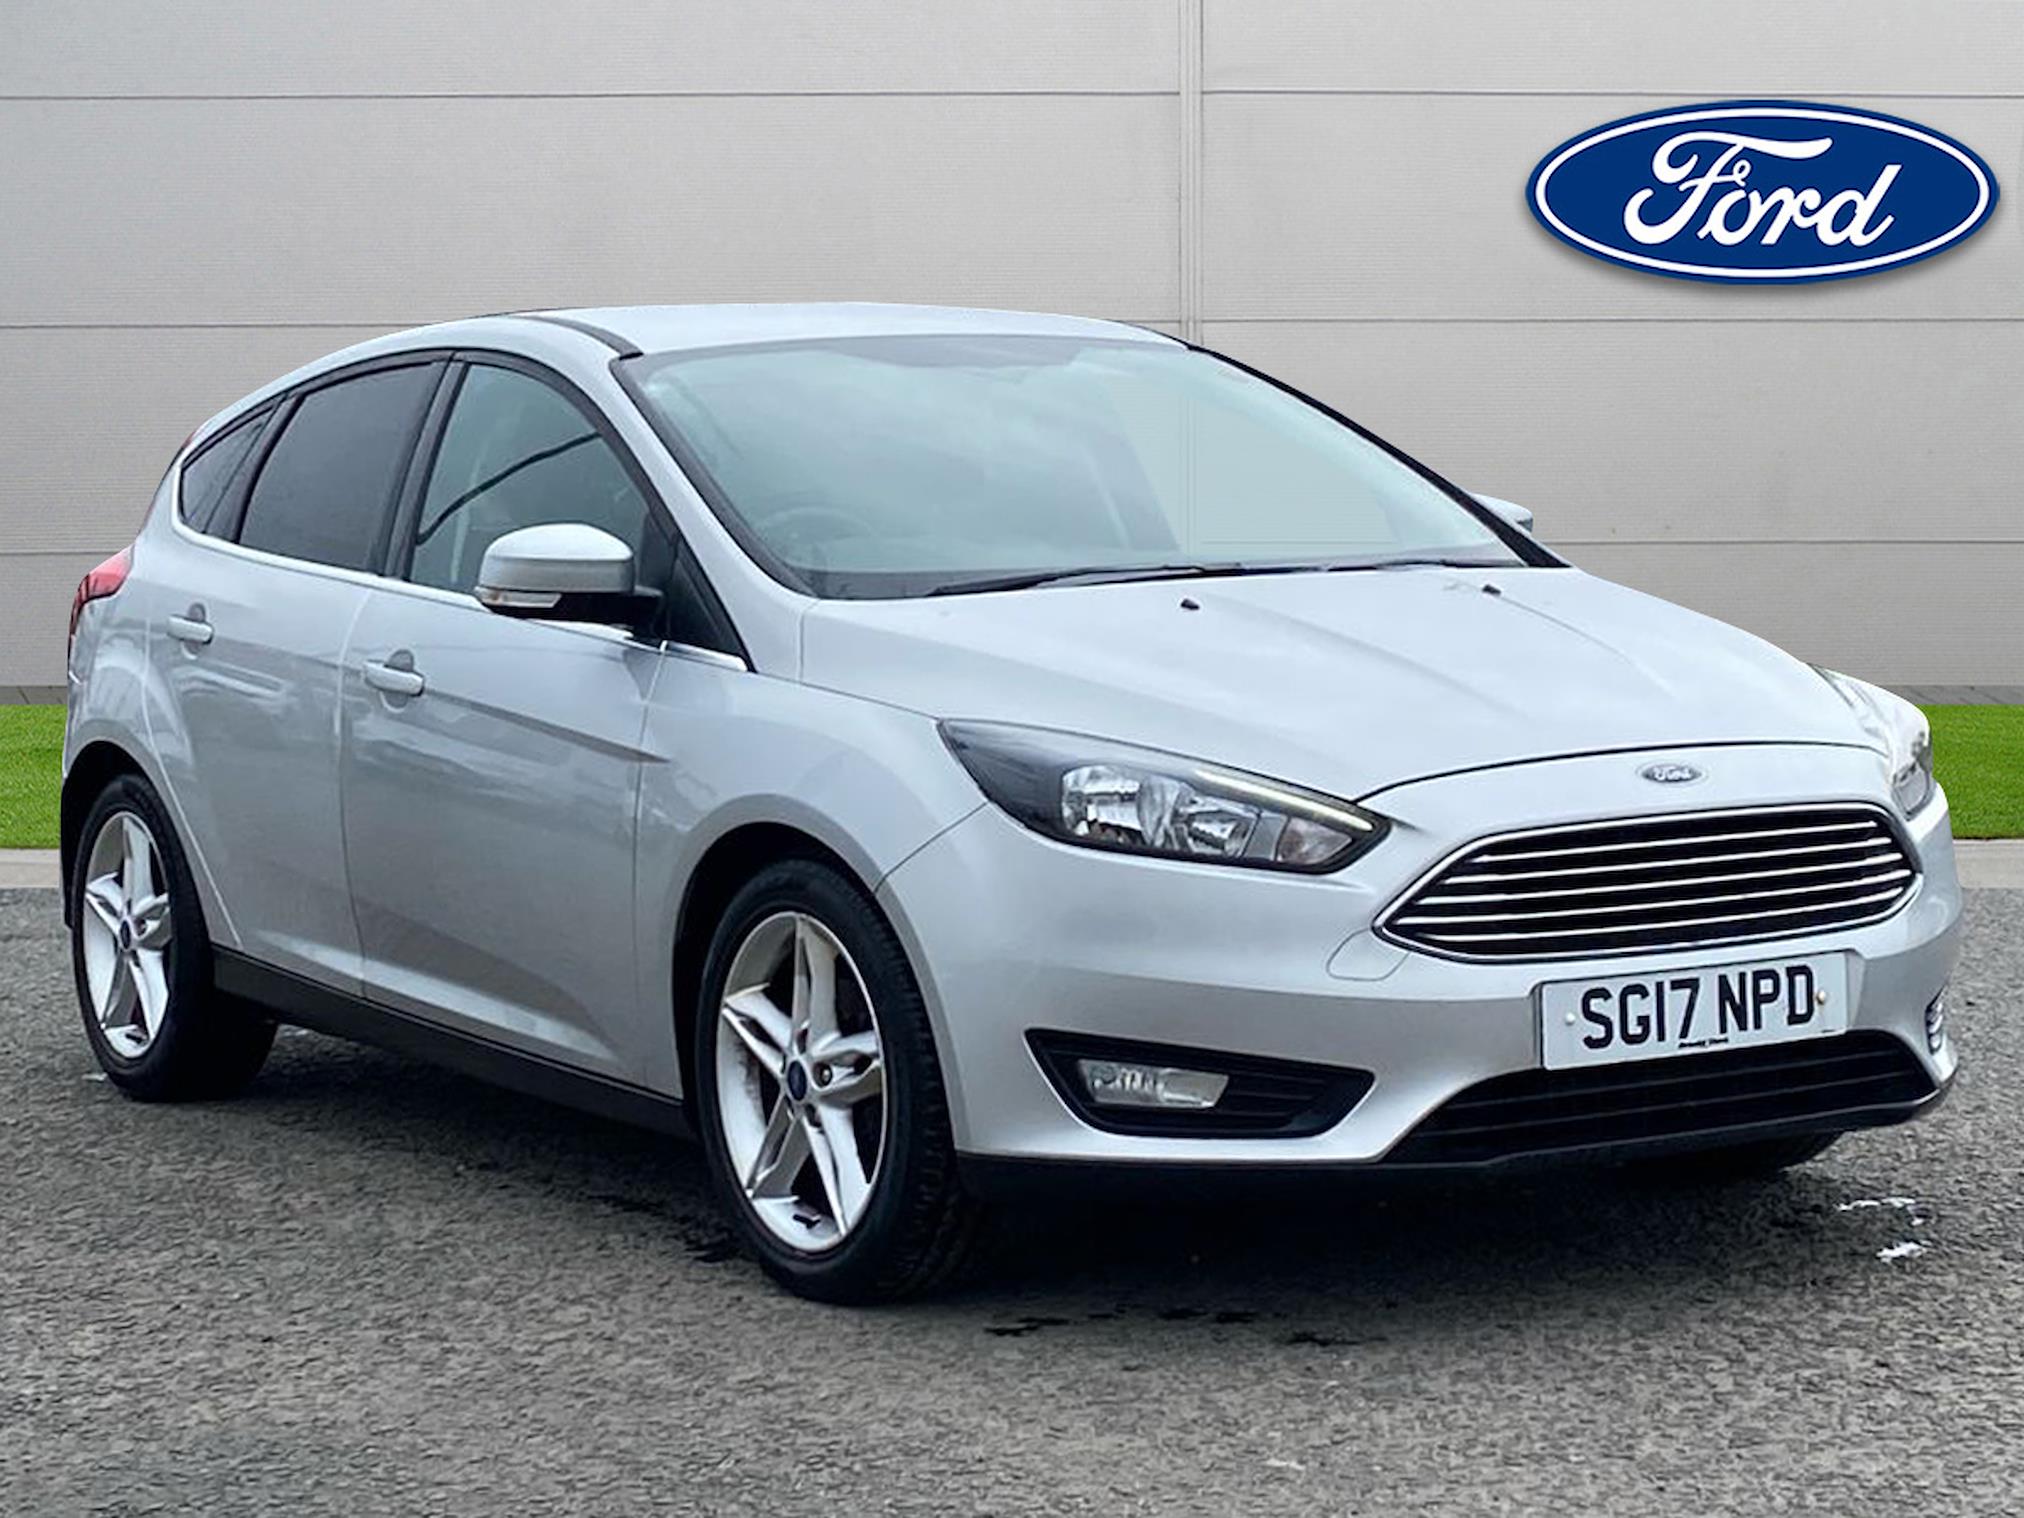 Used FORD FOCUS 1.5 Tdci 120 Zetec Edition 5Dr 2018